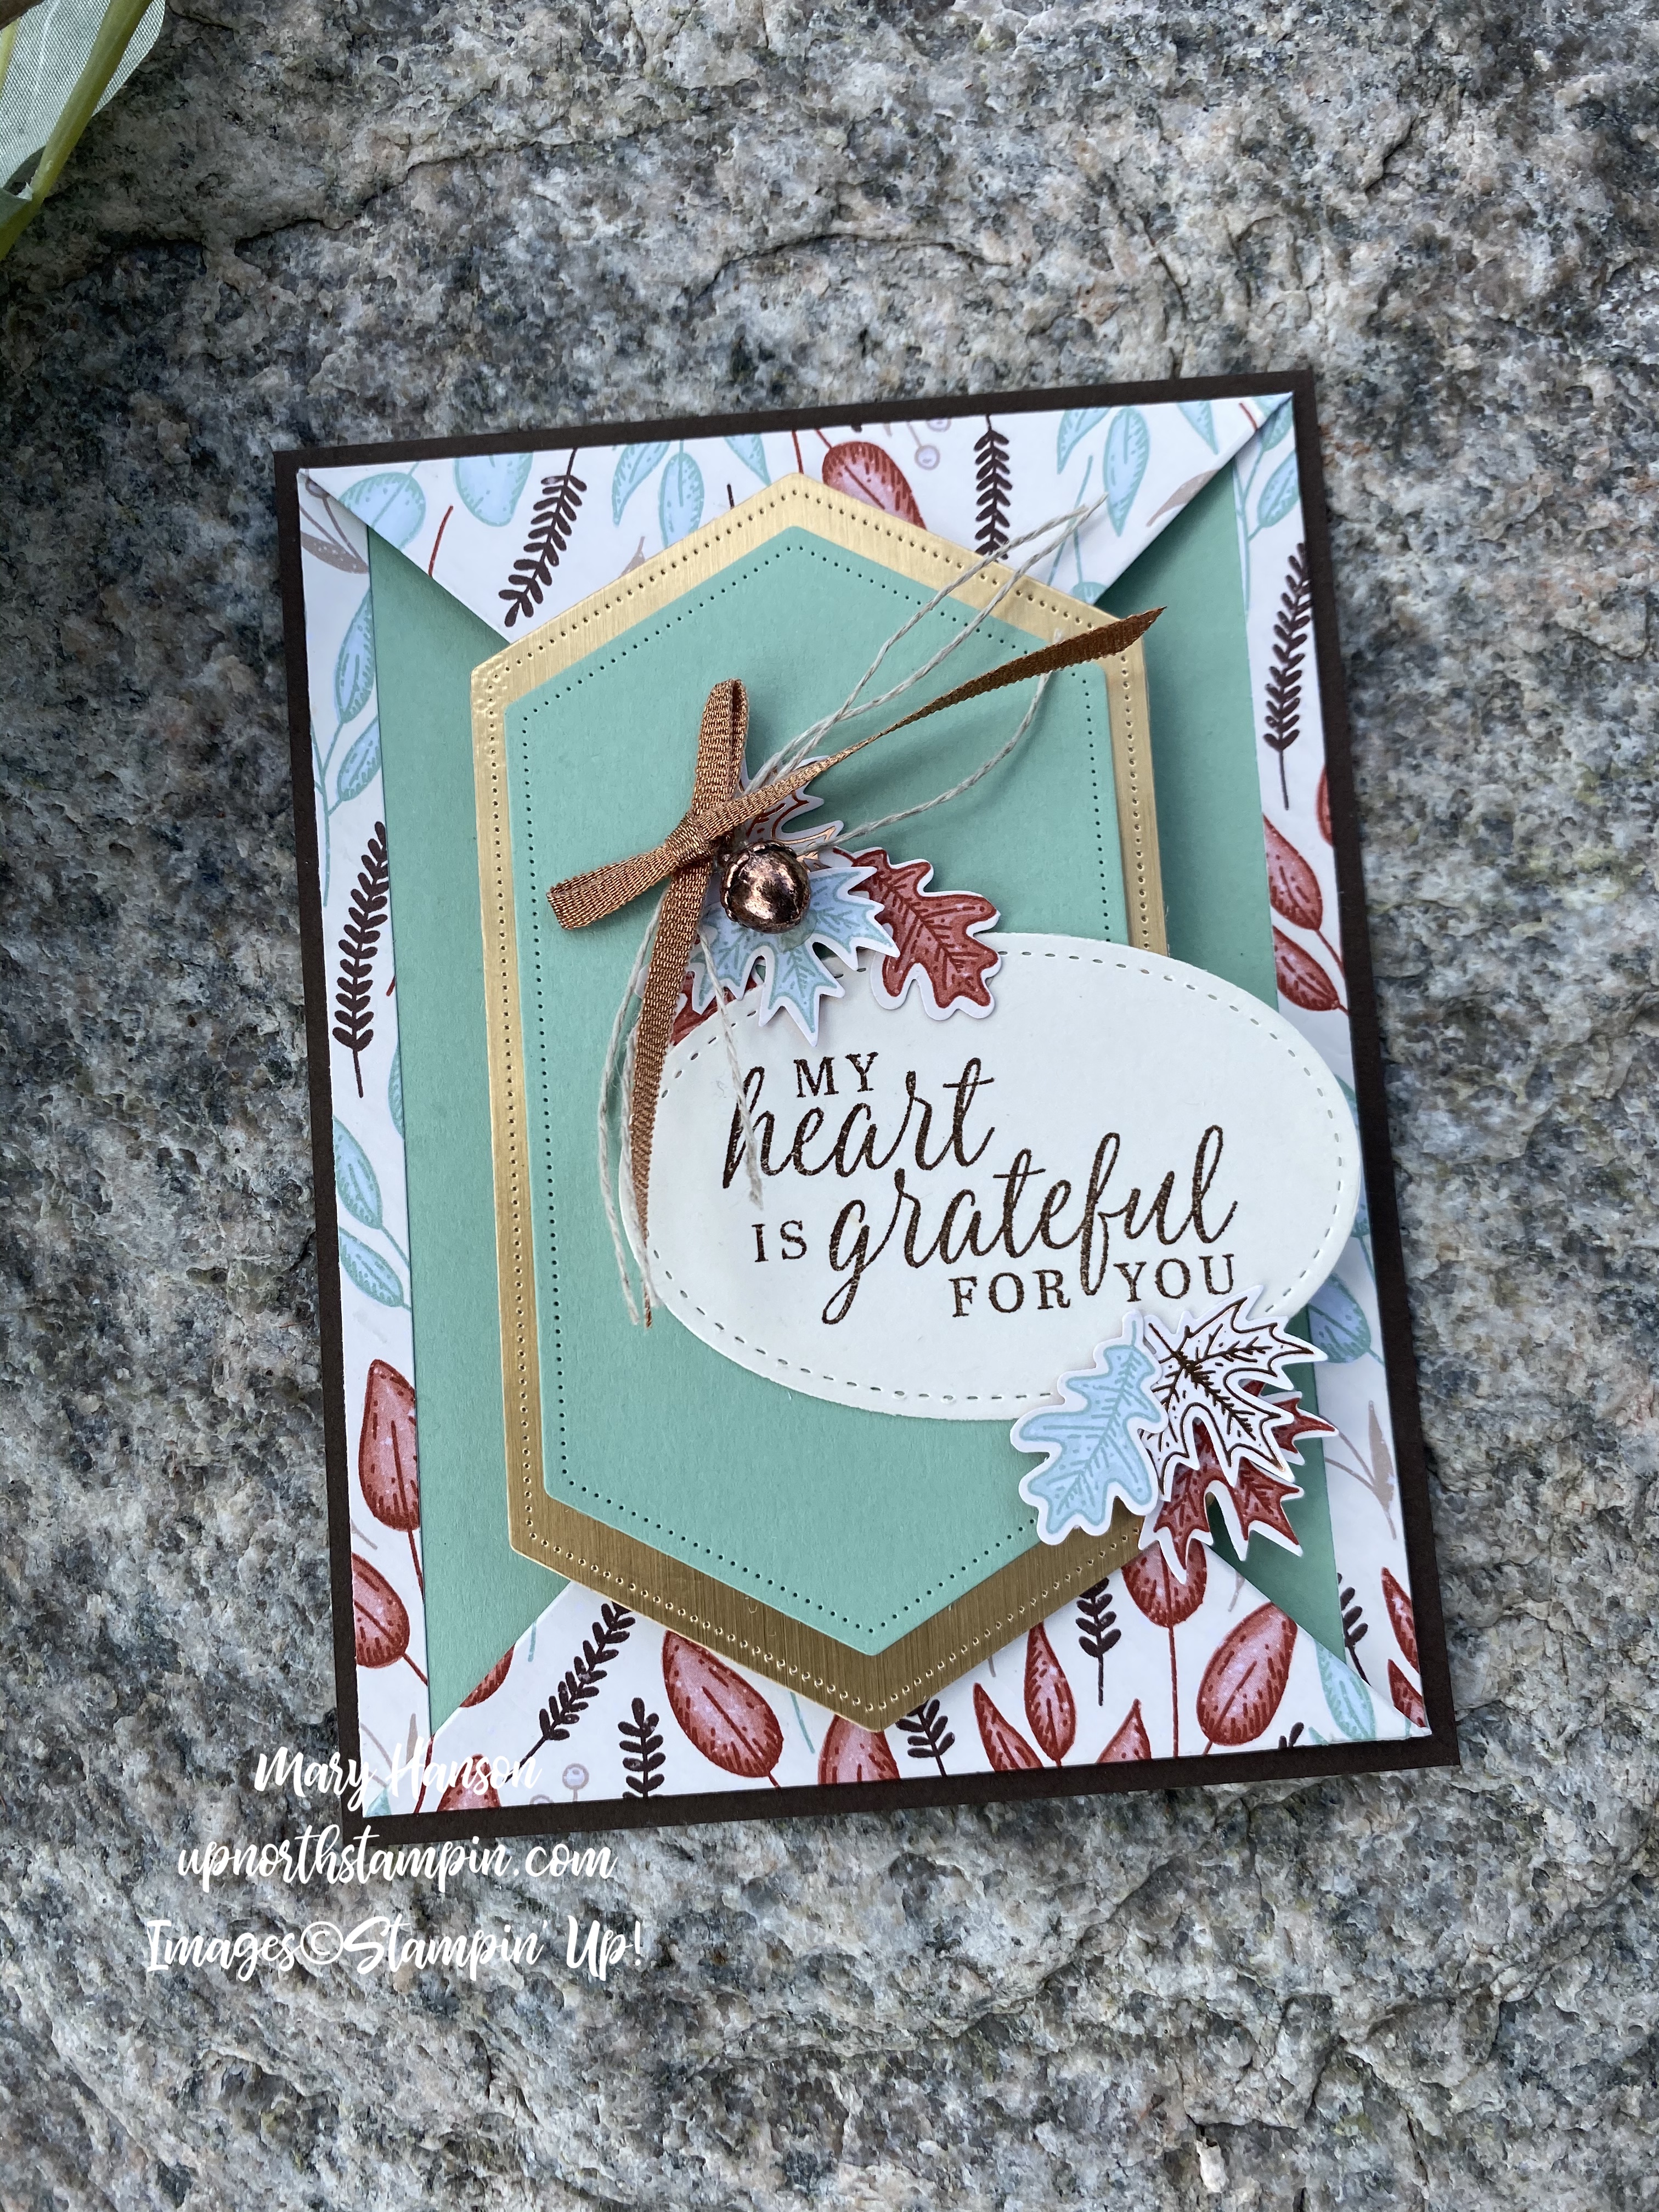 Beautiful Autumn Suite - Rock 1 - Mary Hanson - Up North Stampin'